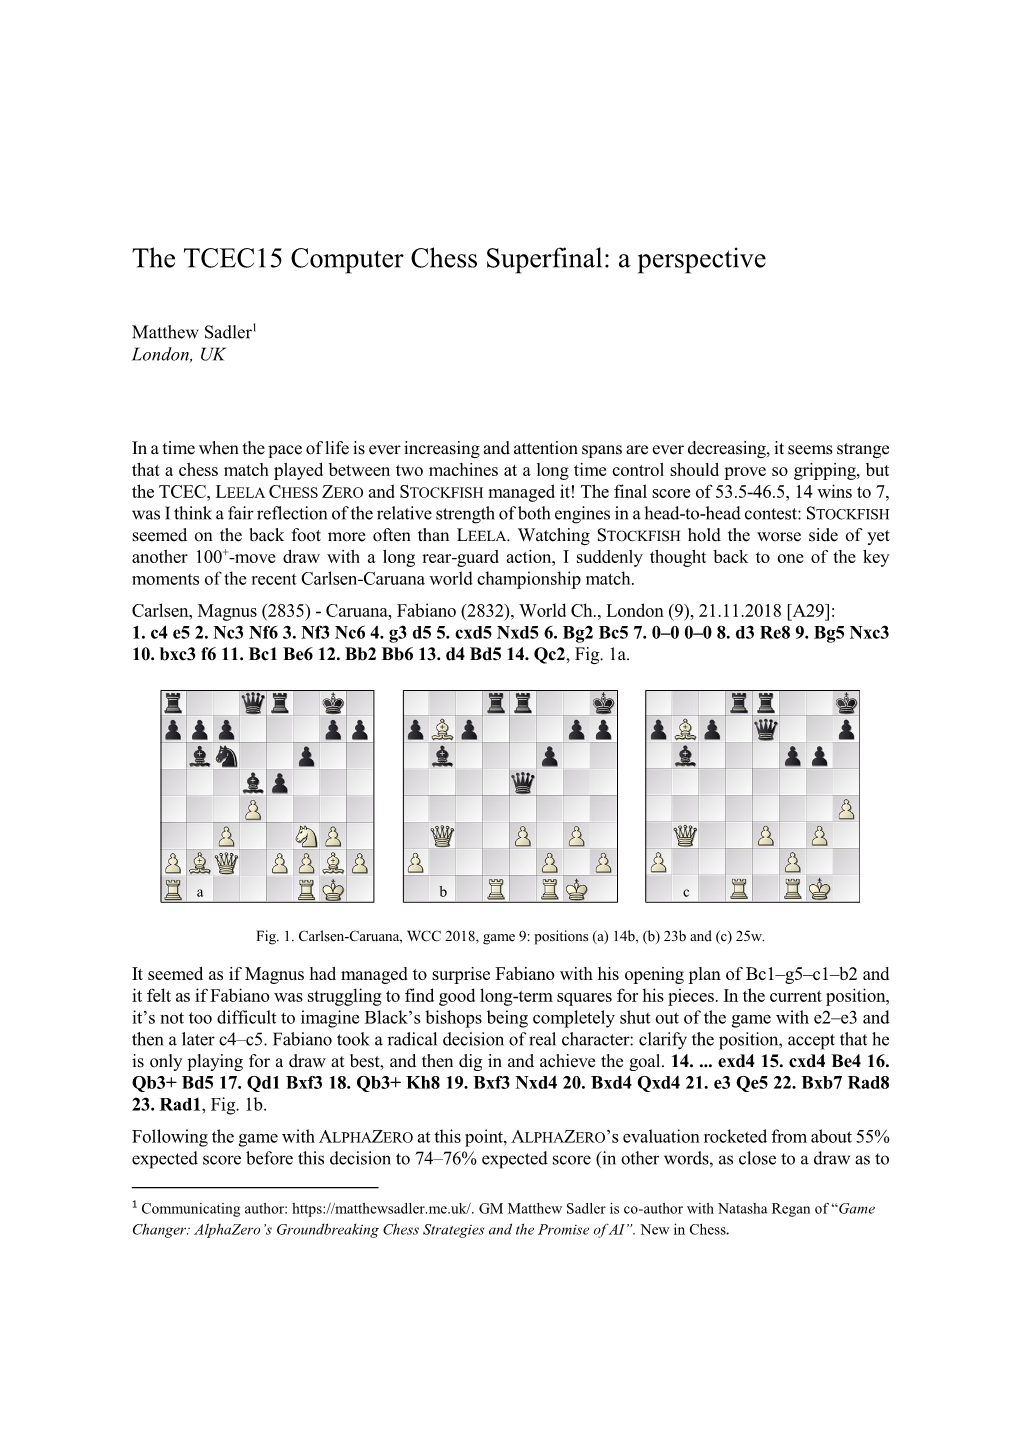 The TCEC15 Computer Chess Superfinal: a Perspective